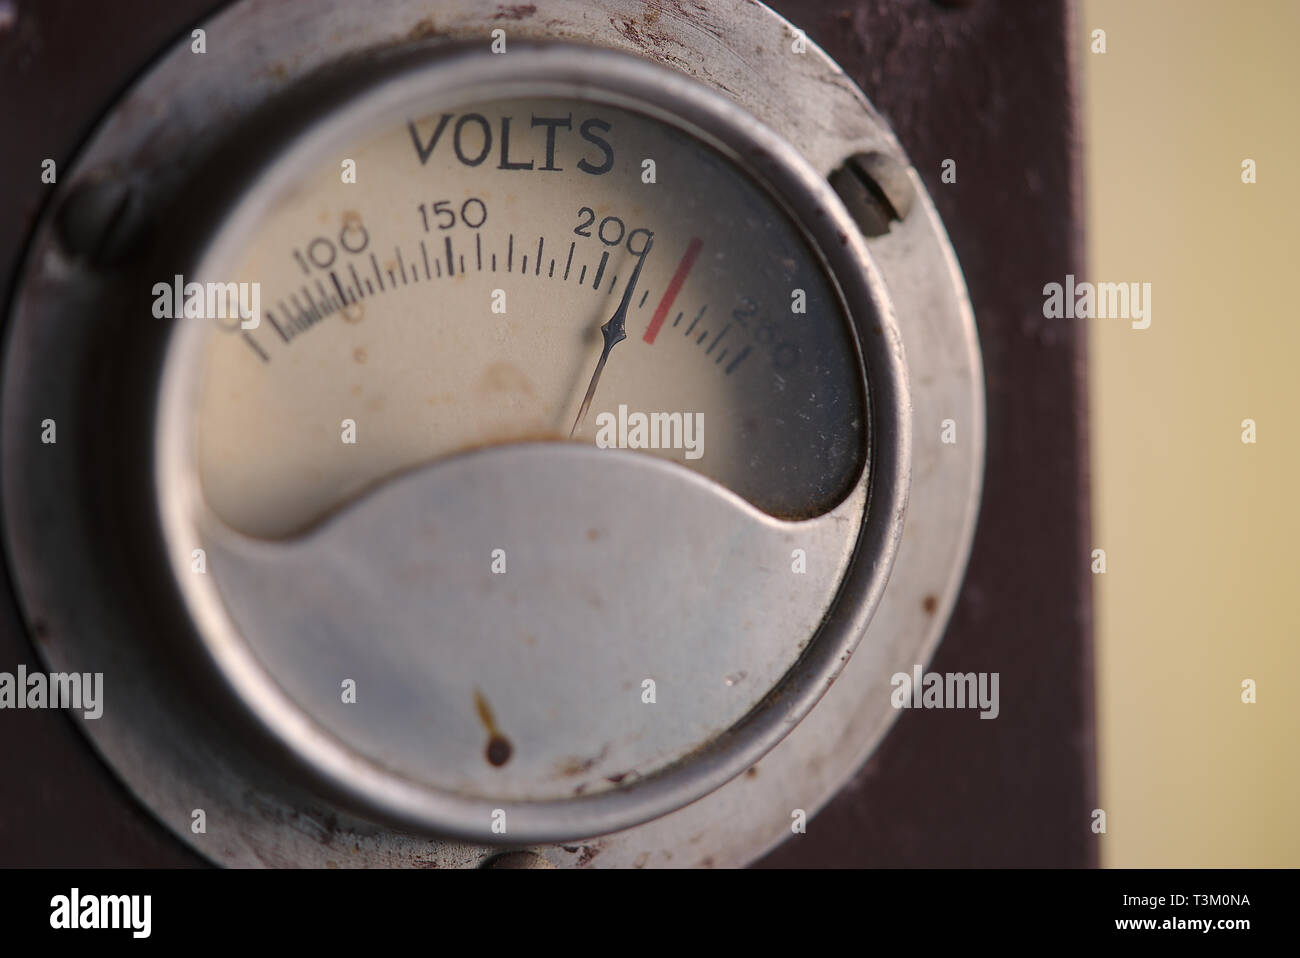 dial indicating a vintage power supply, close-up Stock Photo